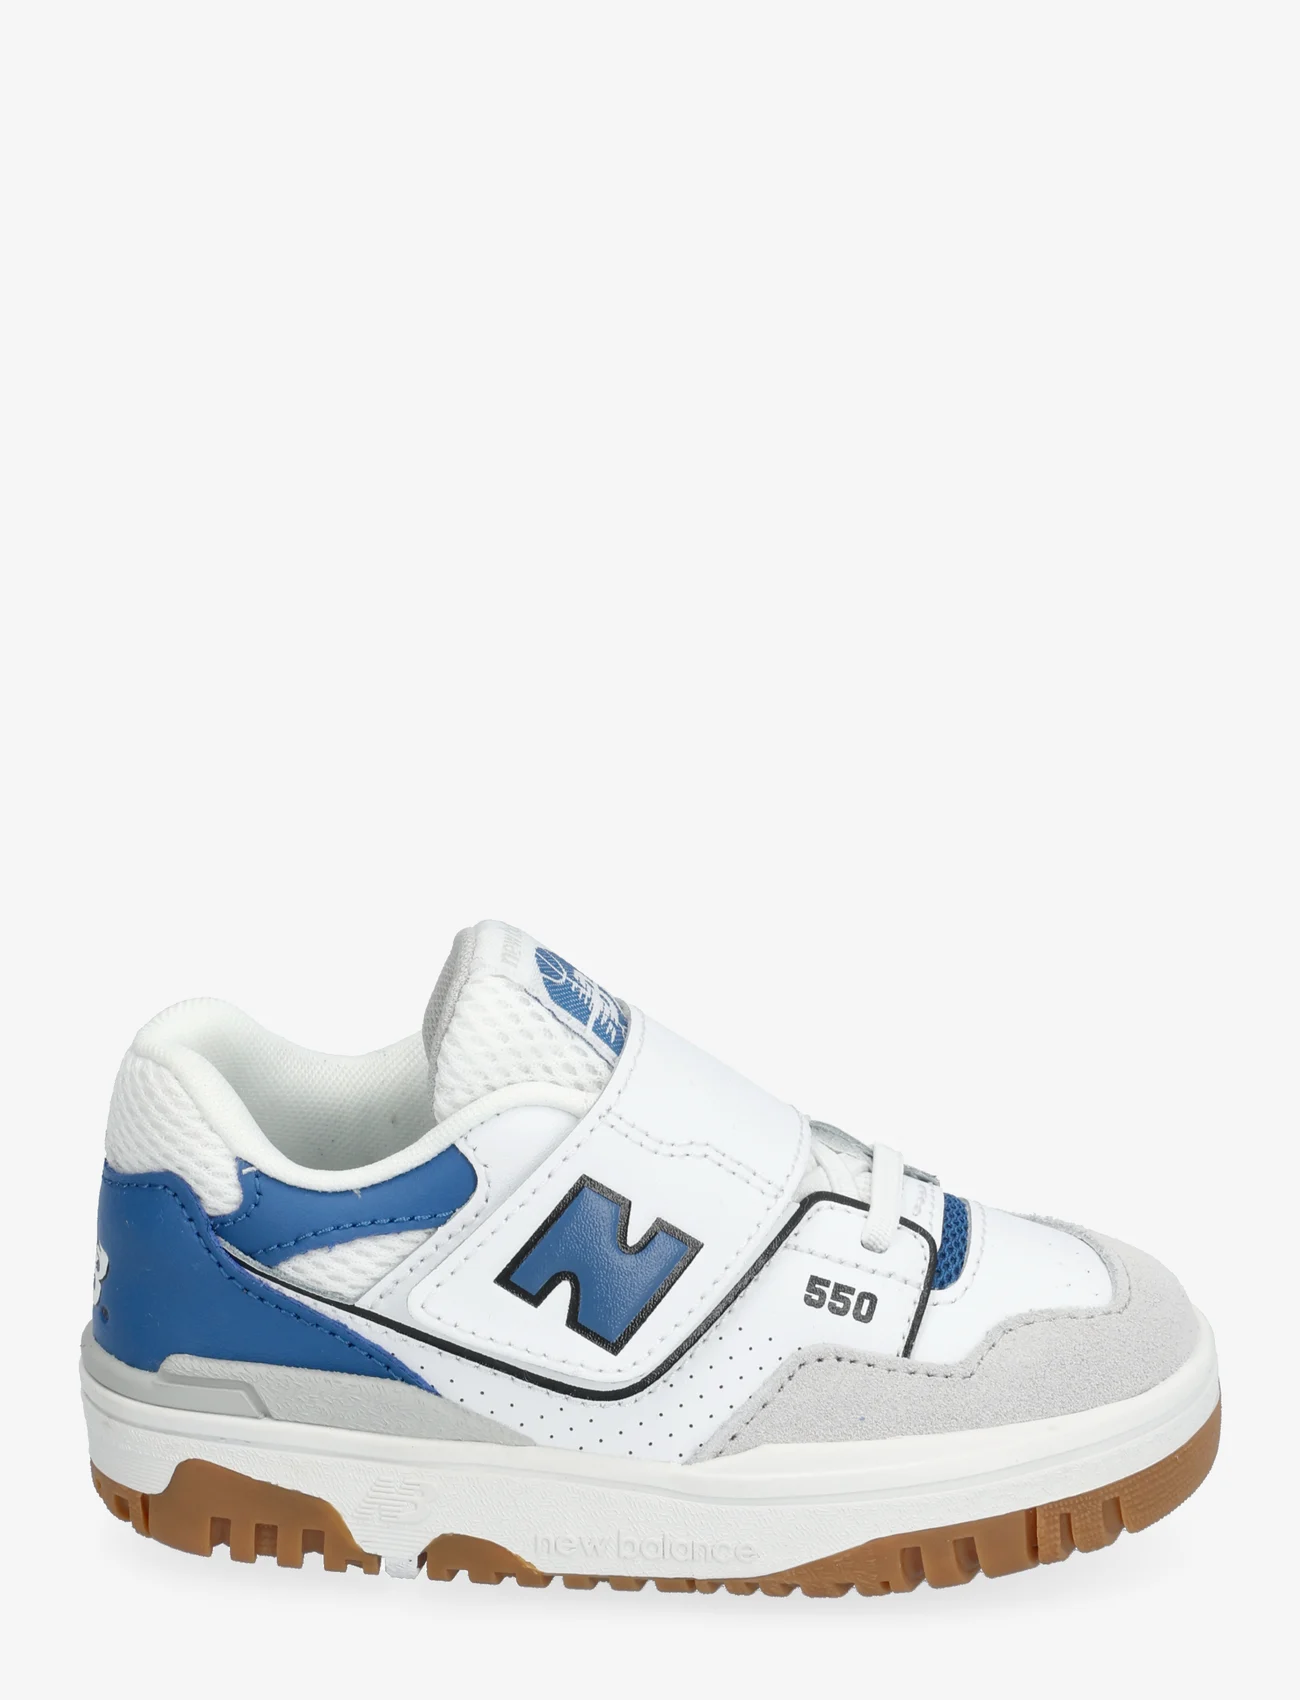 New Balance - New Balance 550 Bungee Lace with HL Top Strap - laufschuhe - brighton grey - 1